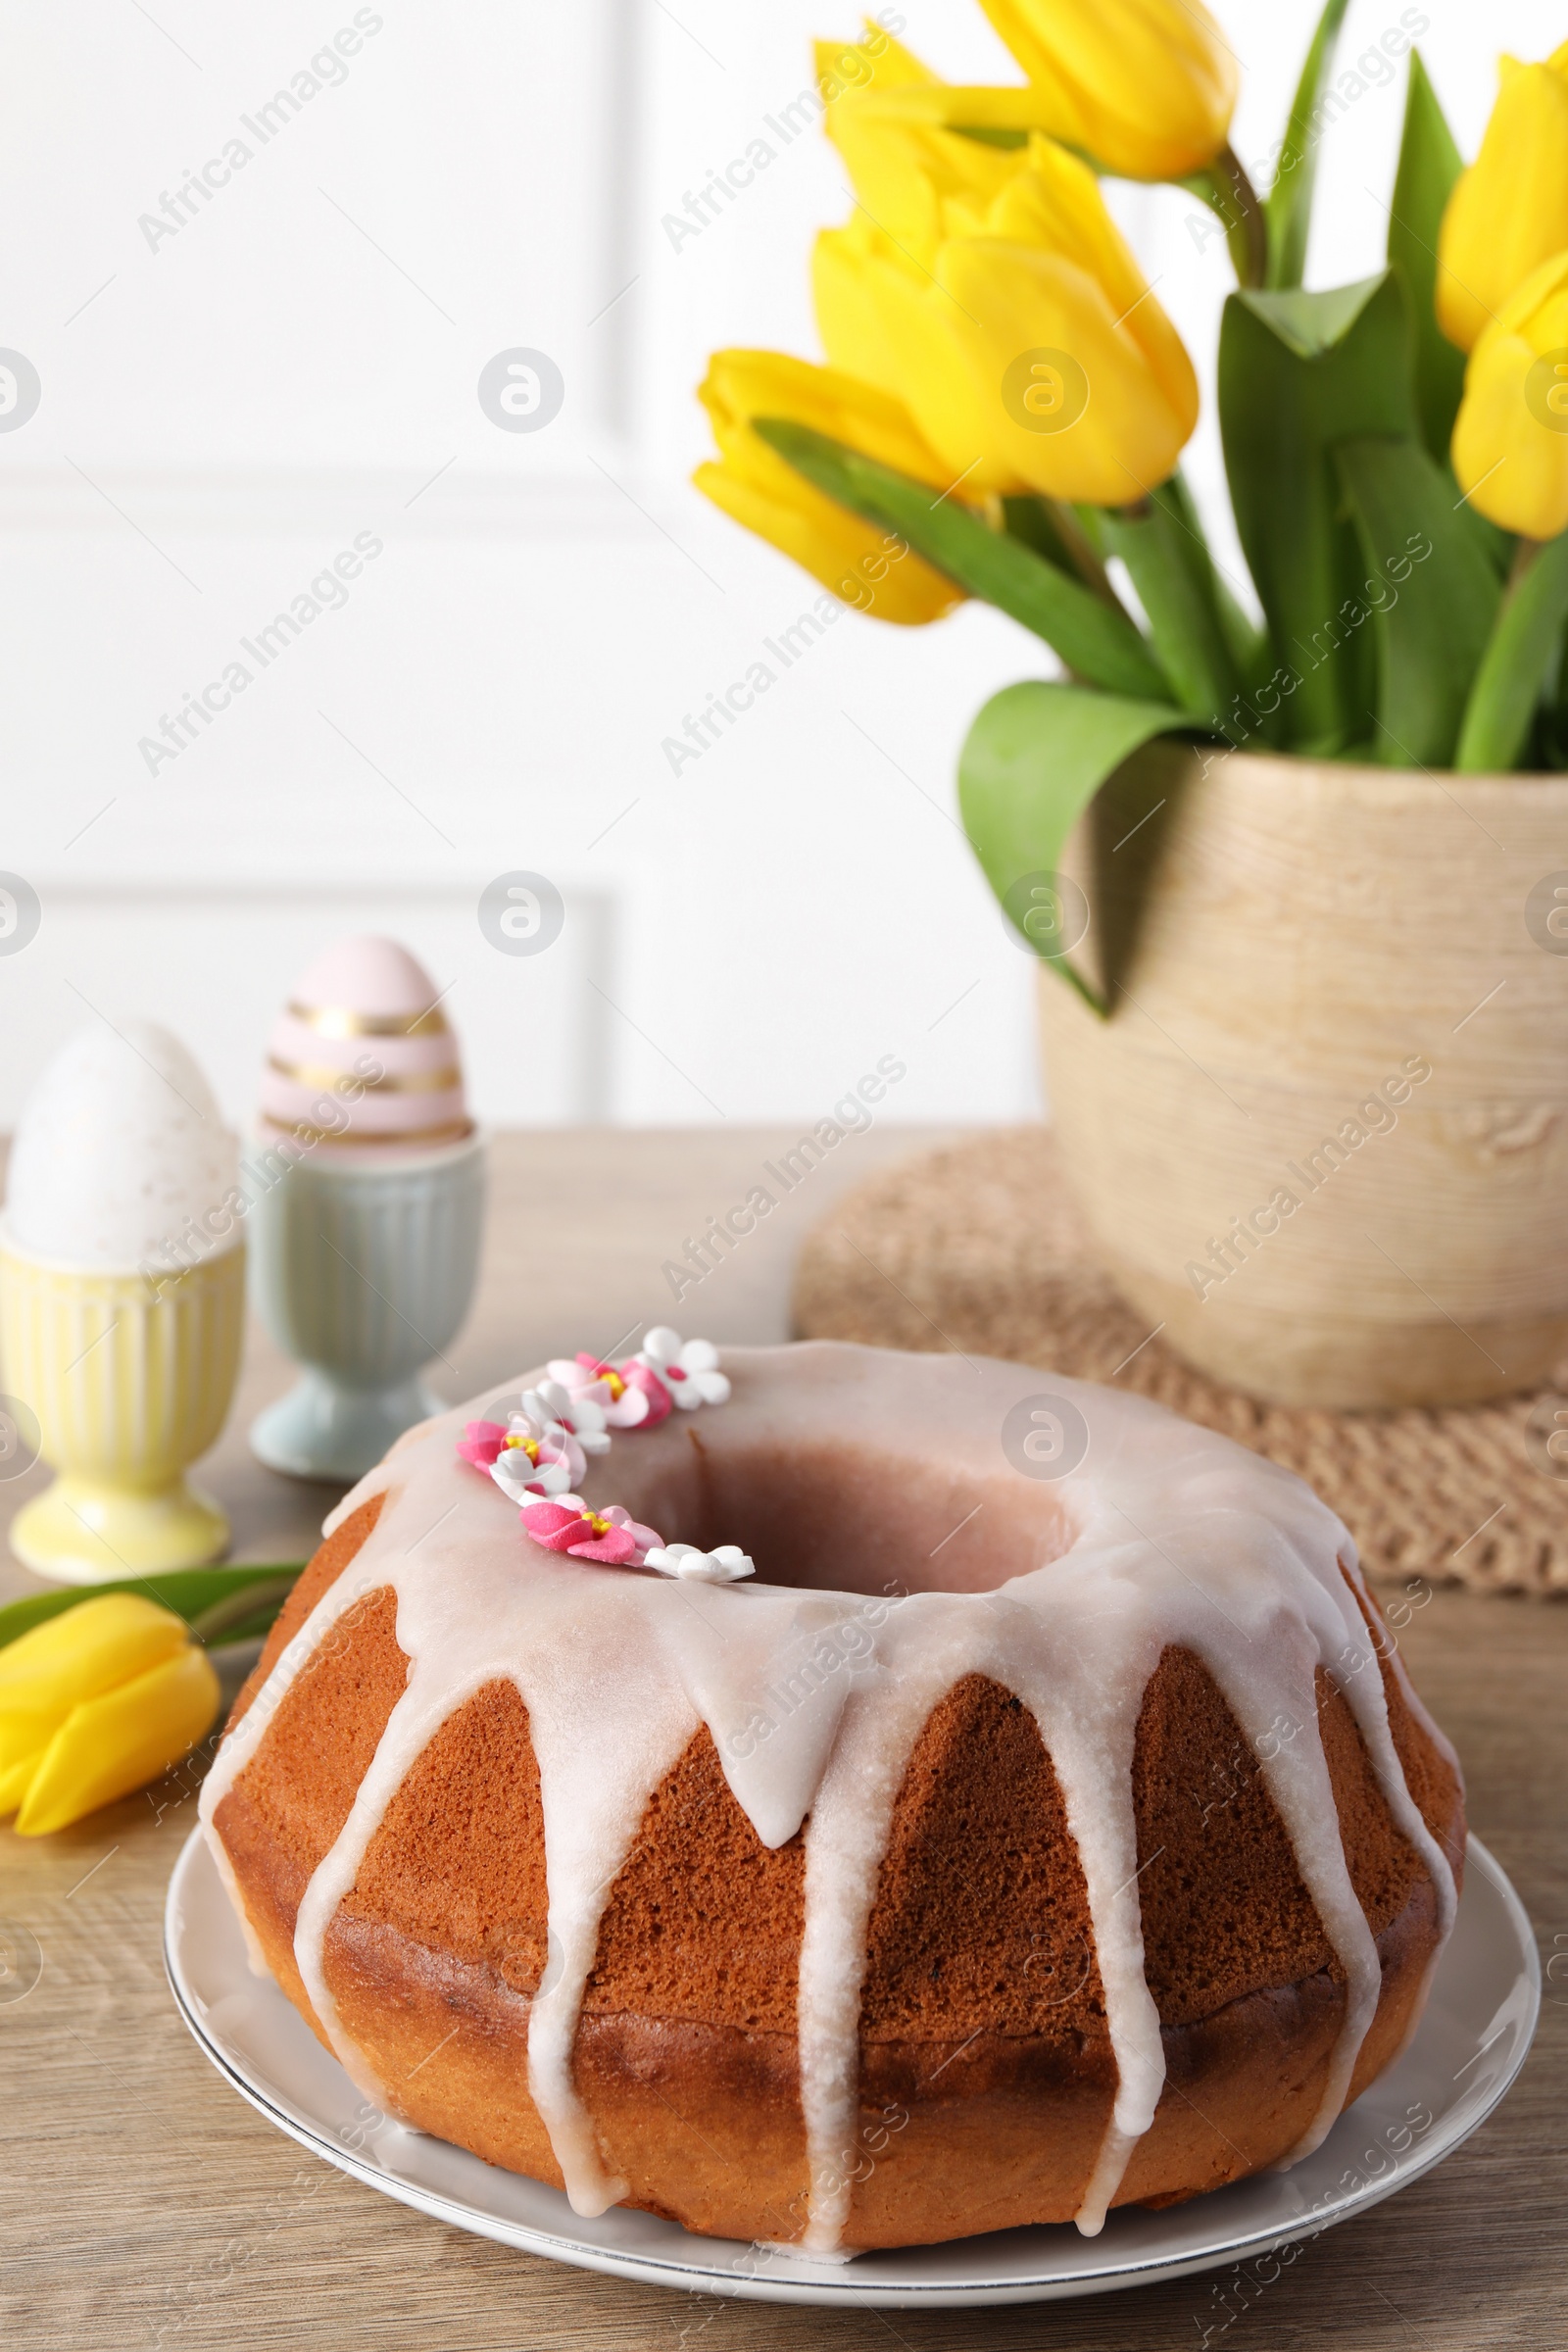 Photo of Delicious Easter cake decorated with sprinkles near beautiful tulips and painted eggs on wooden table